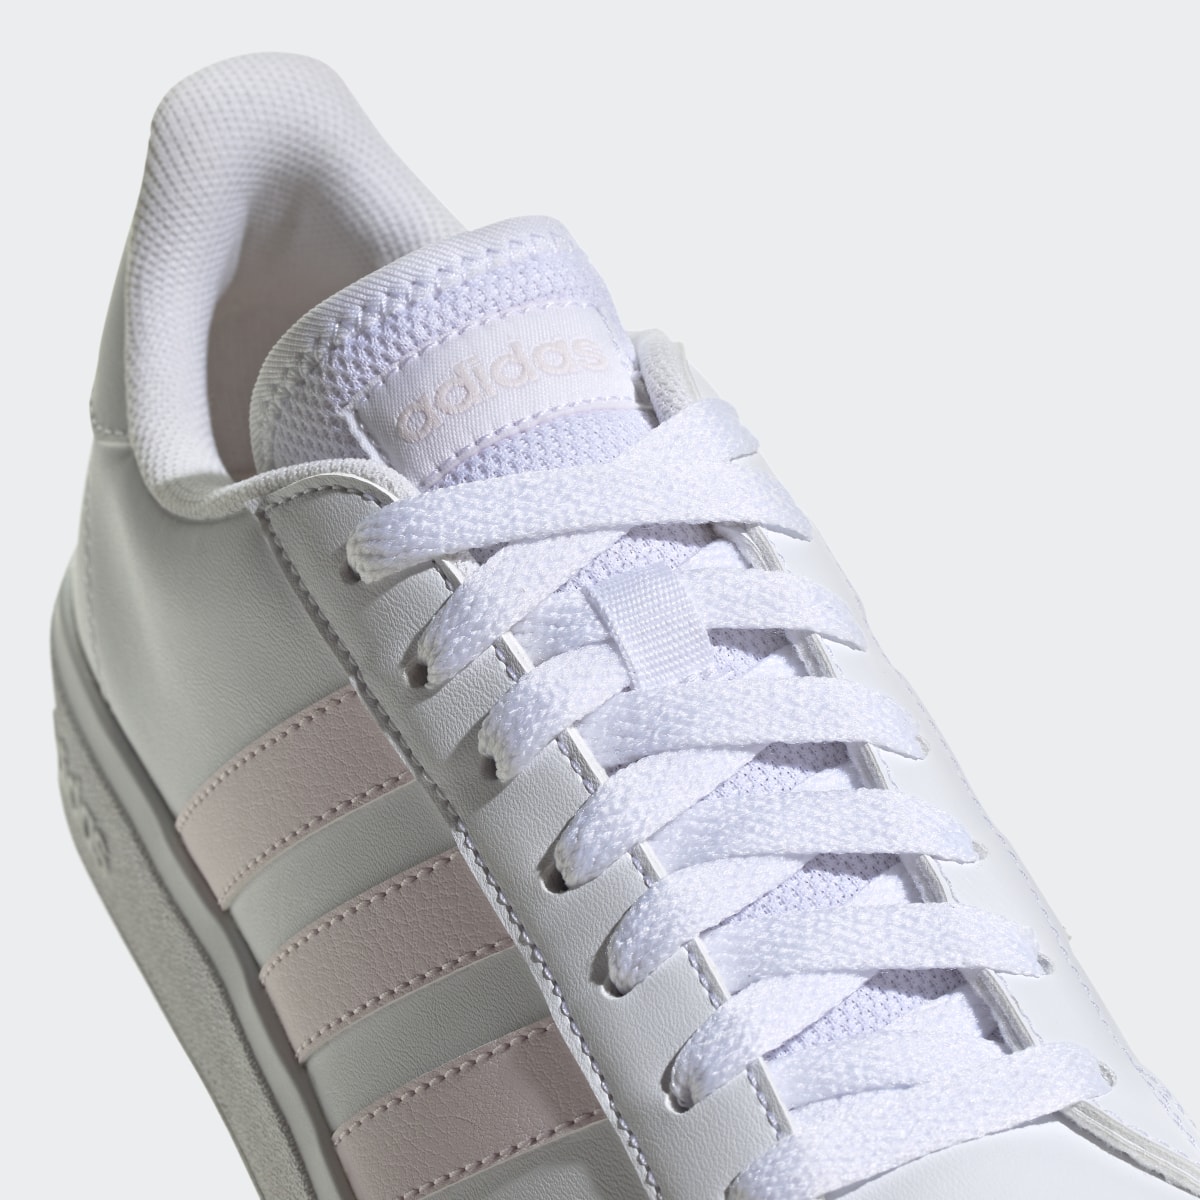 Adidas Grand Court TD Lifestyle Court Casual Shoes. 8